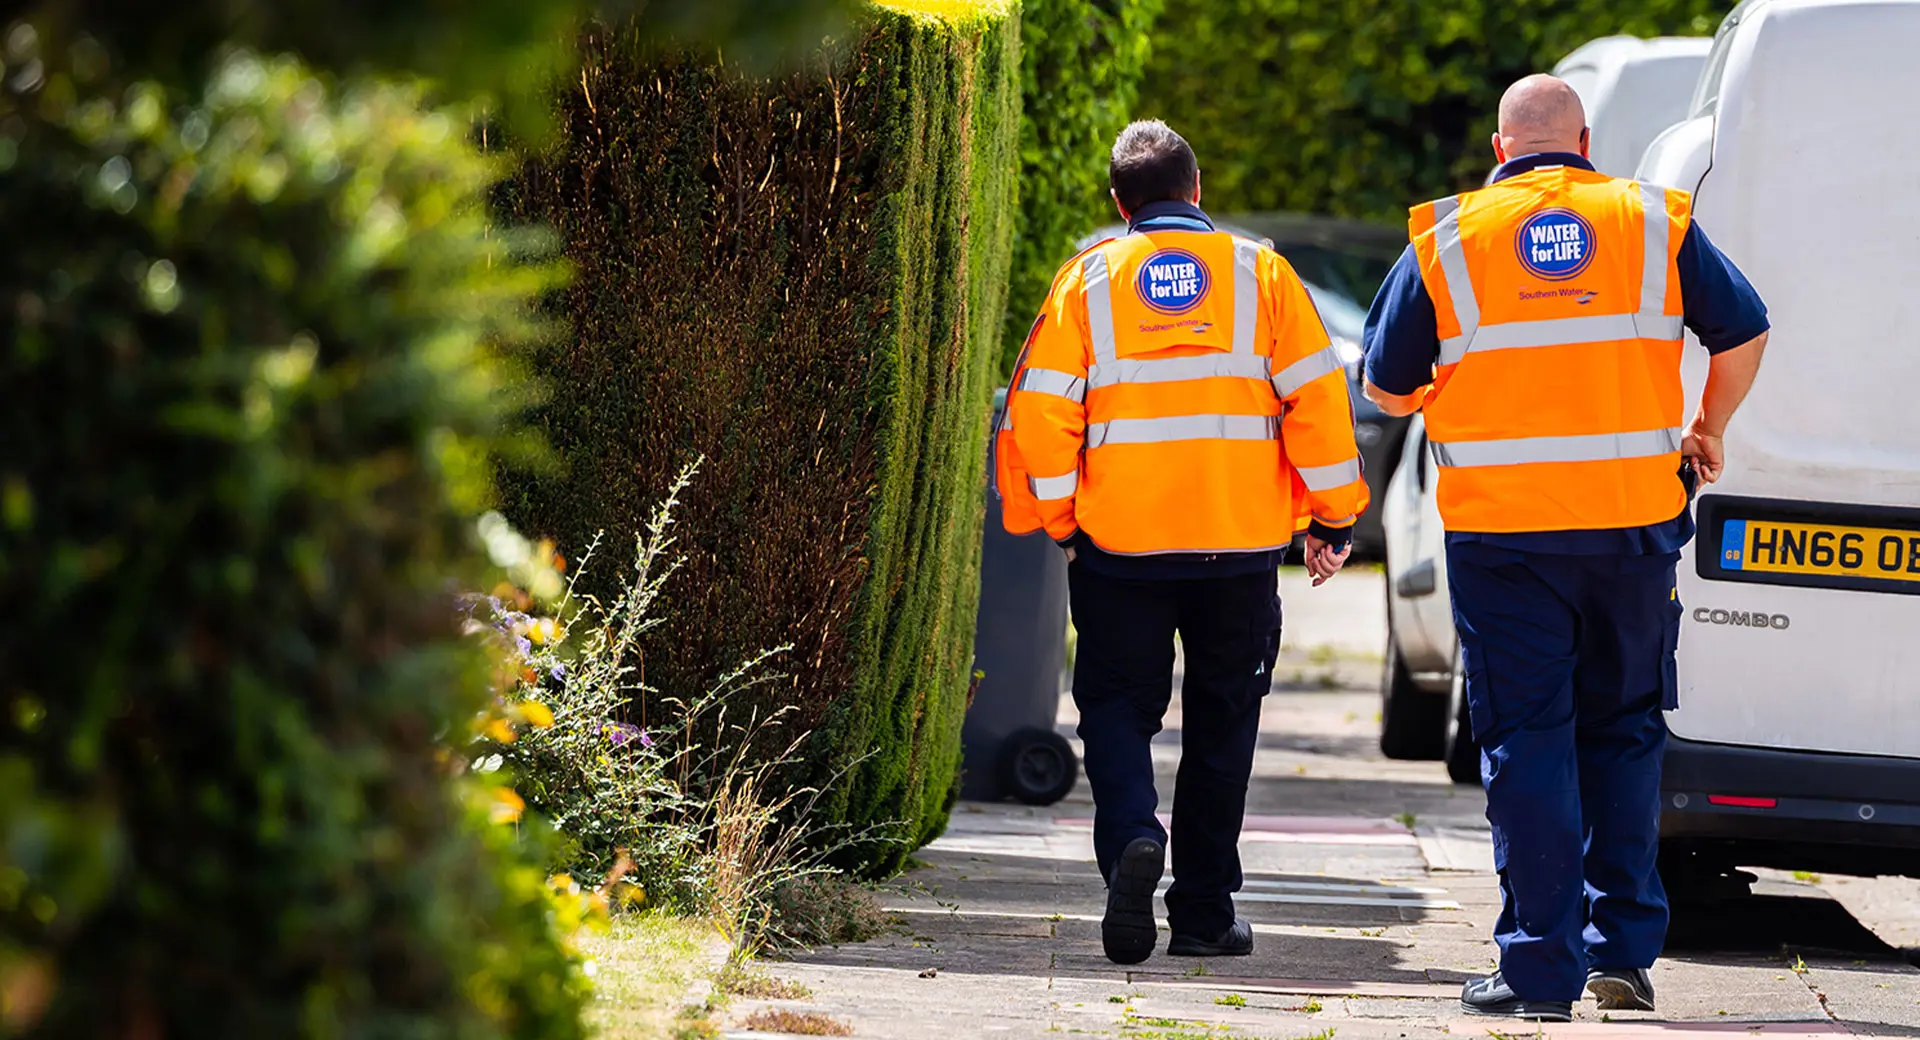 Two Southern Water engineers walk down a residential street on a sunny day